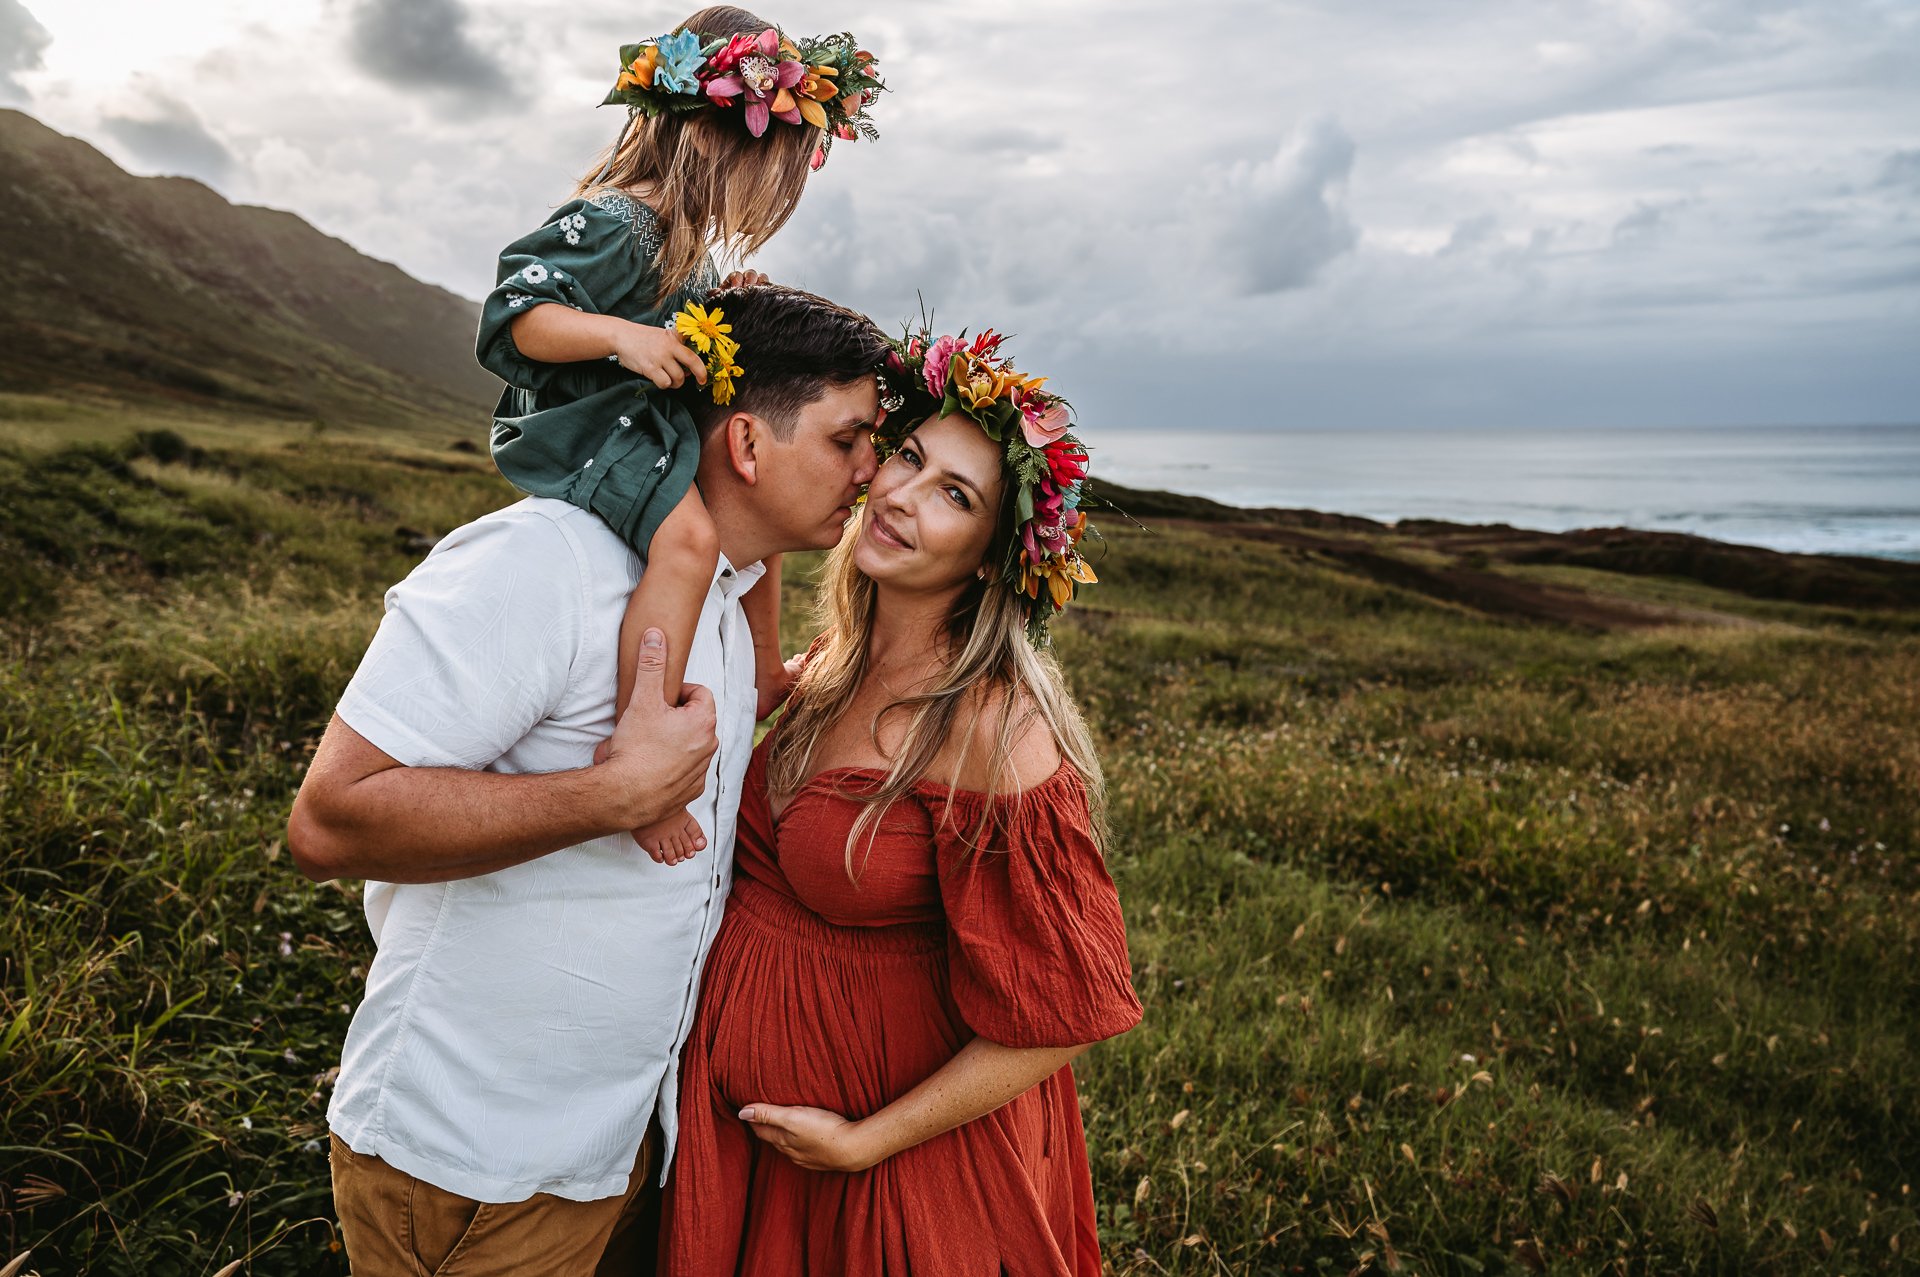 Kaena-Point-North-Shore-Oahu-Hawaii-Maternity-Session-Flower-Crown-Gown-Sarah-Elizabeth-Photos-and-film-maternity--8.jpg